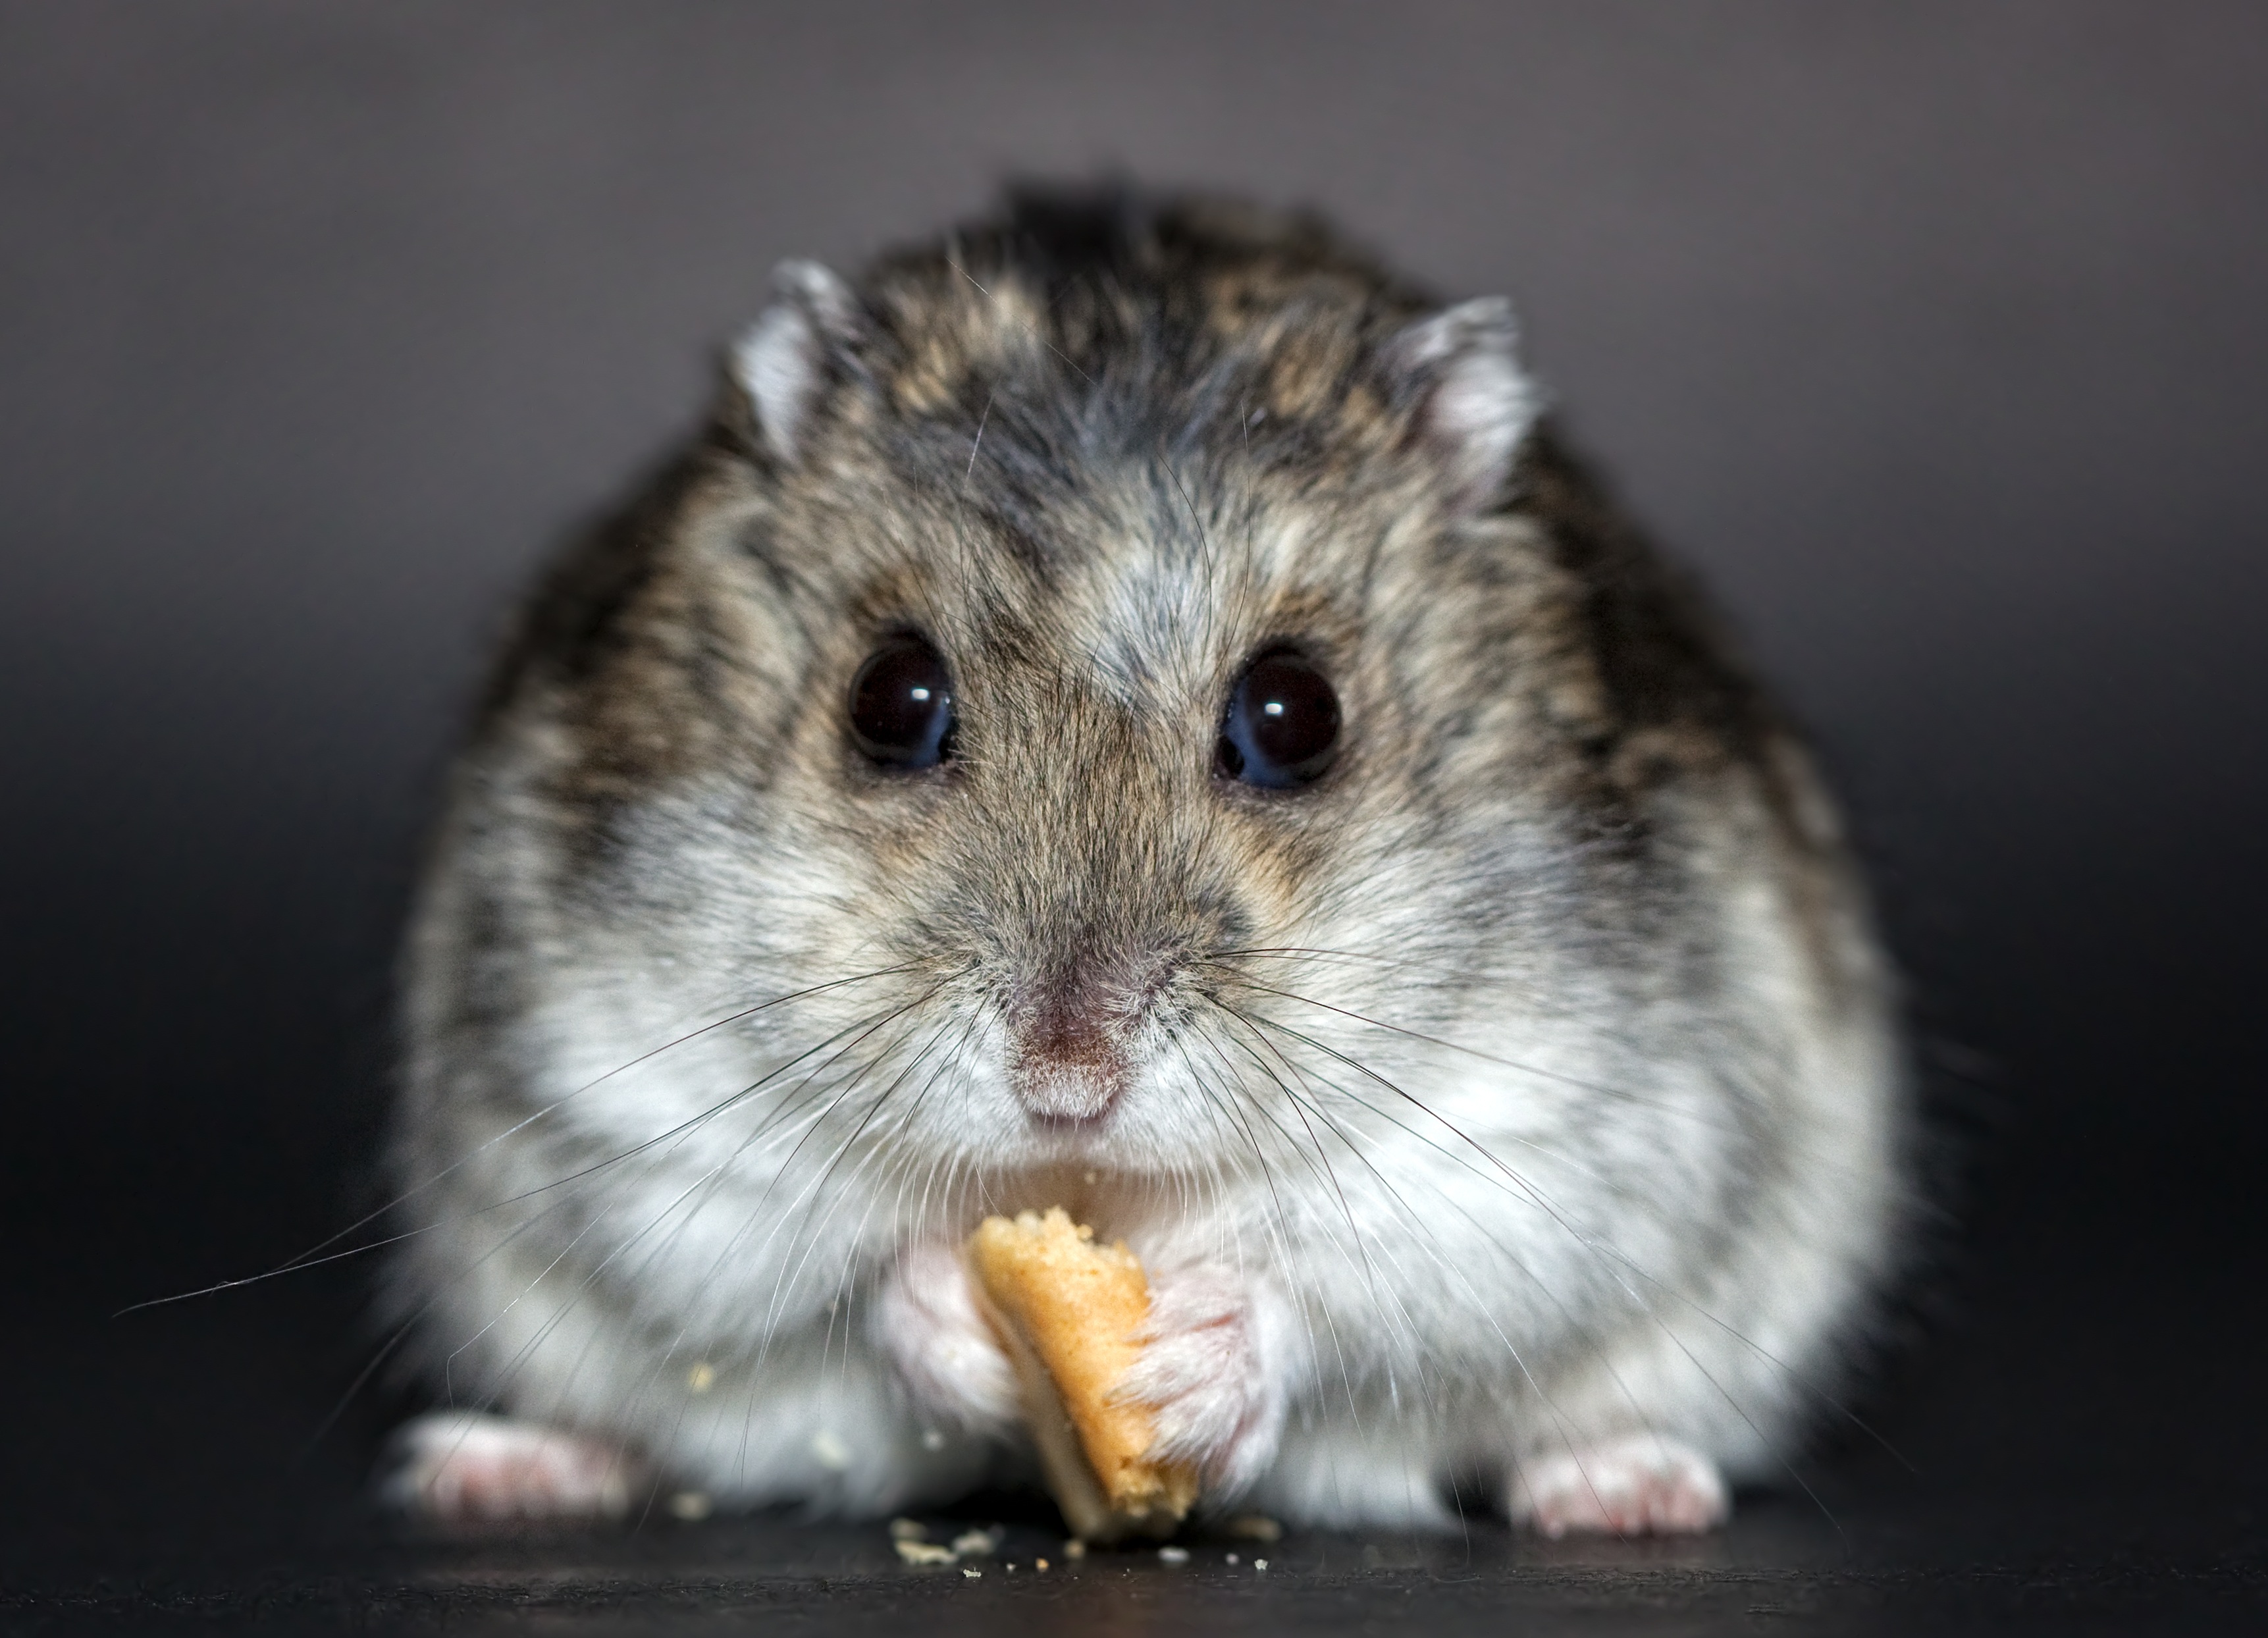 Windows Backgrounds animal, hamster, close up, rodent